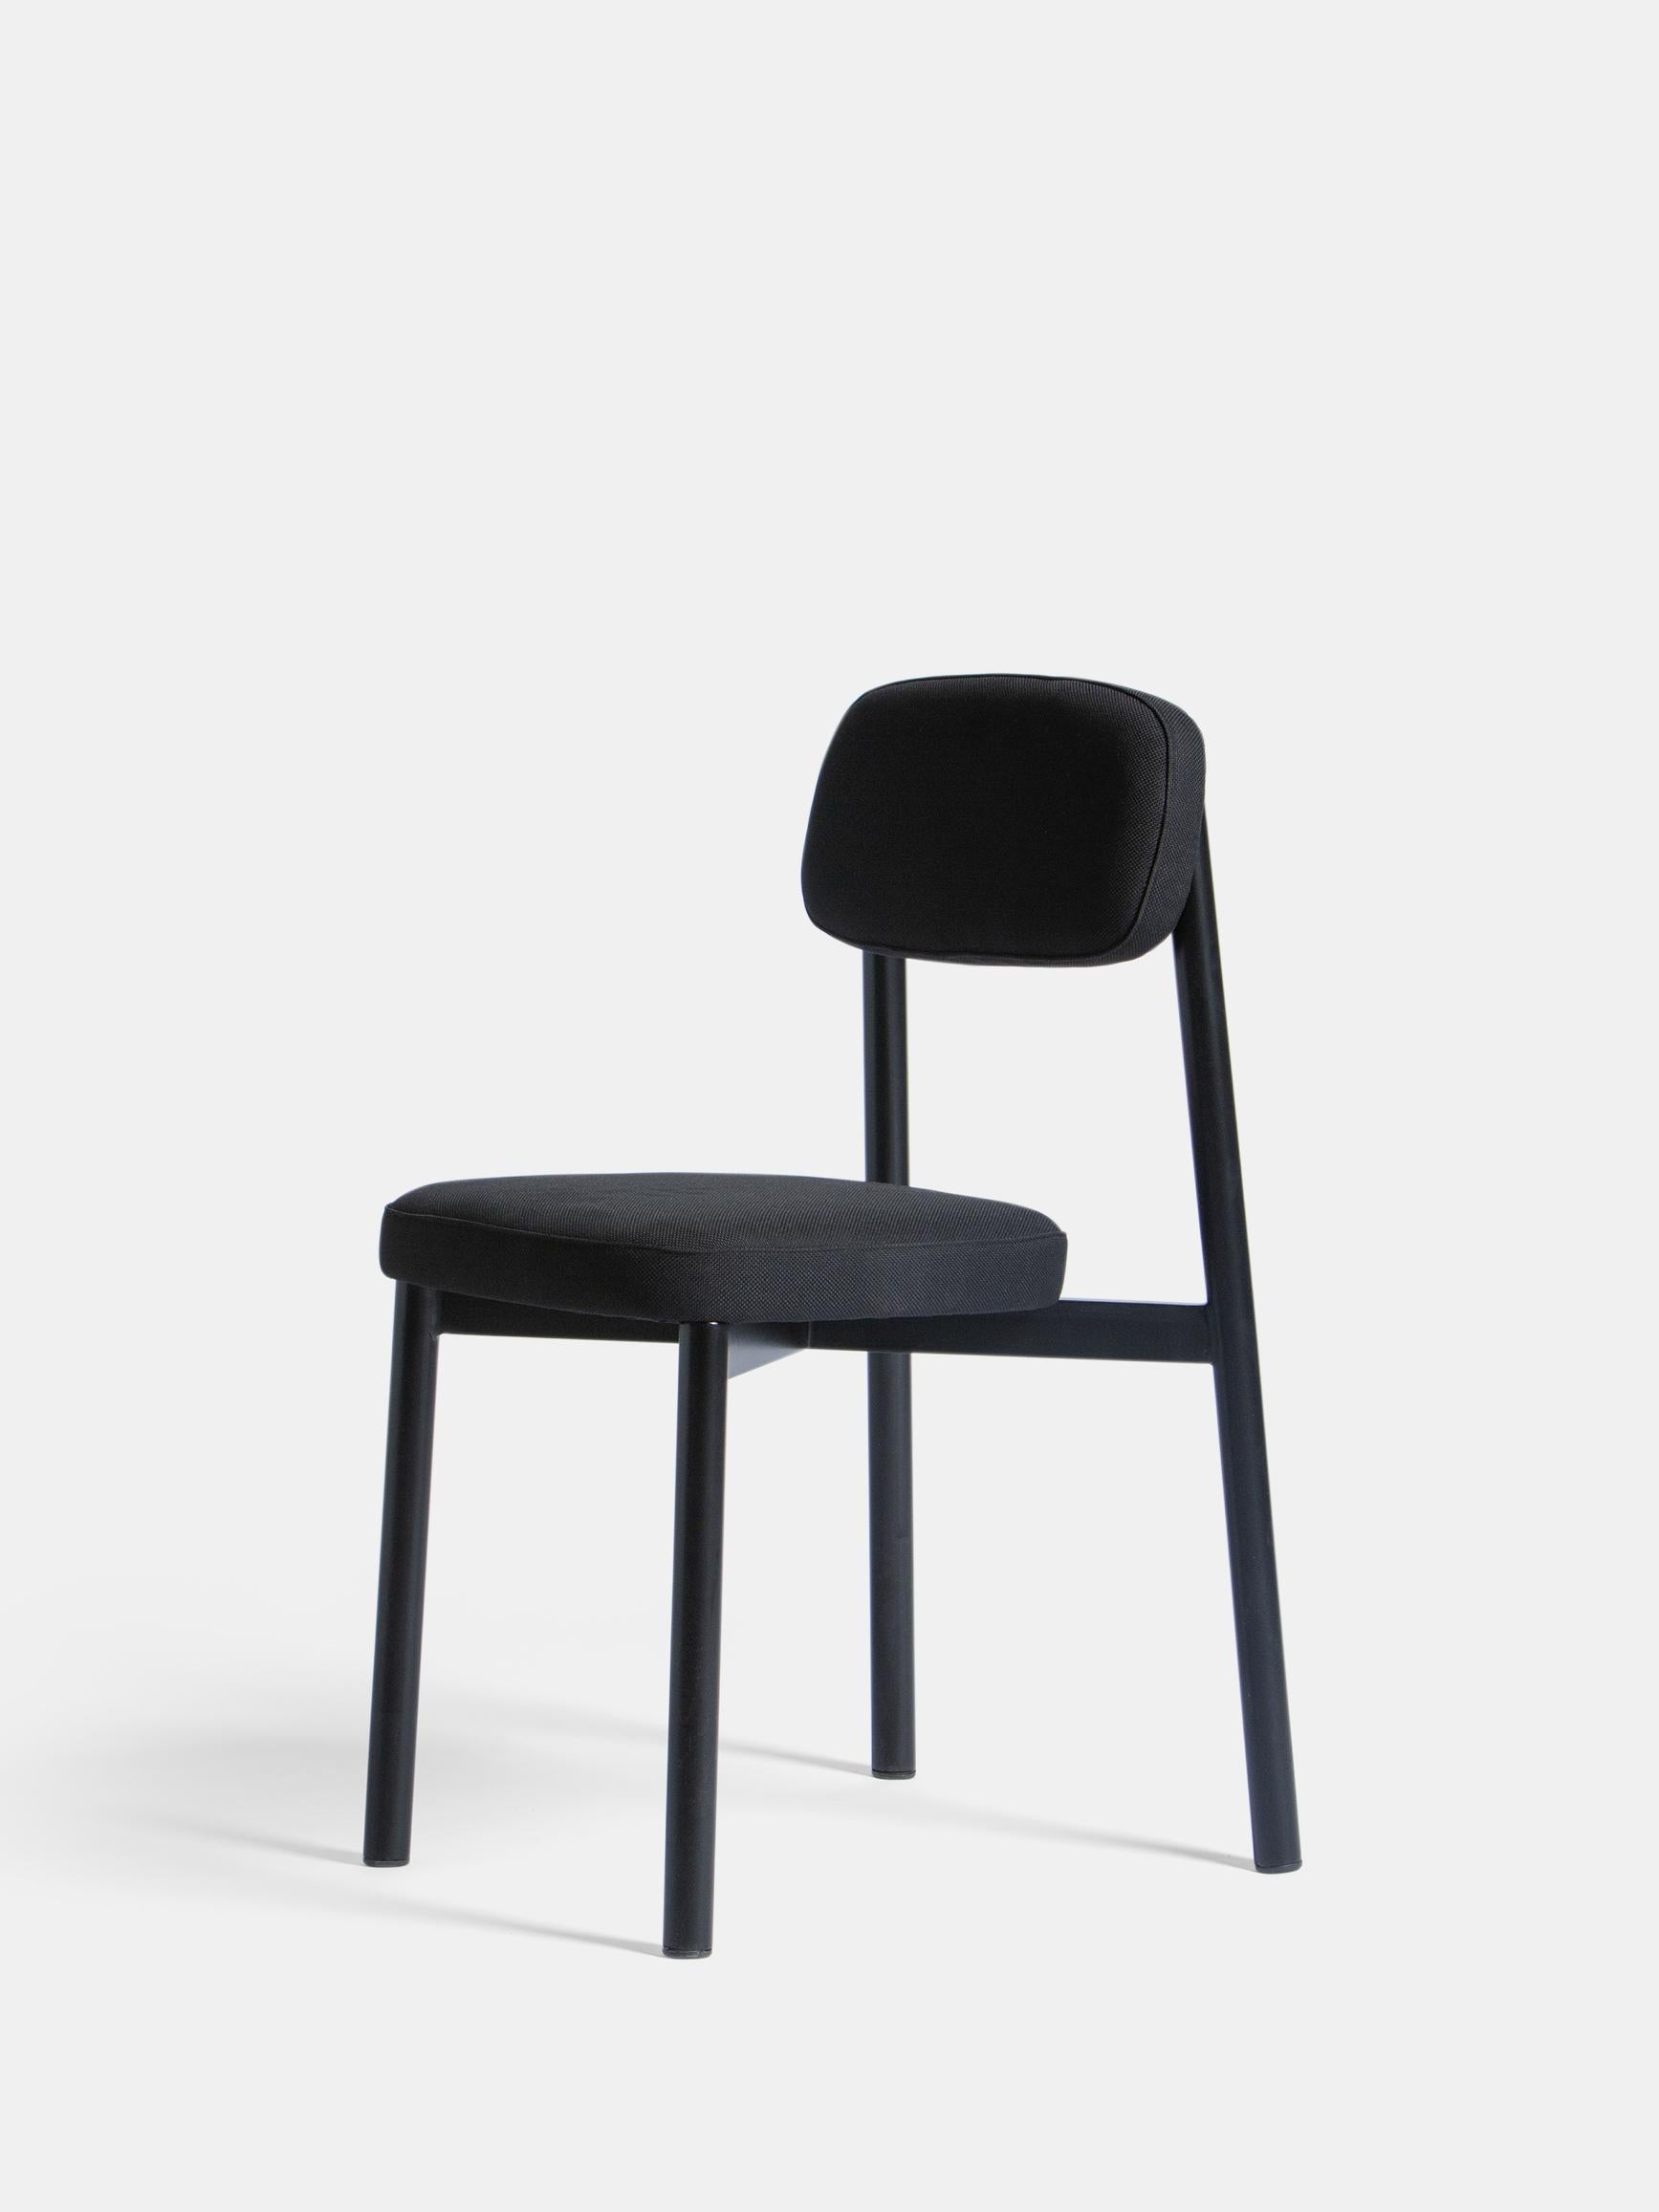 Set of 6 Black Residence Chairs by Kann Design
Dimensions: D 43 x W 50 x H 77 cm.
Materials: Steel tube, HR foam, fabric upholstery Kvadrat Relate 191 (100% Trevira).
Available in other colors.

All of the Residence seats were created by designer